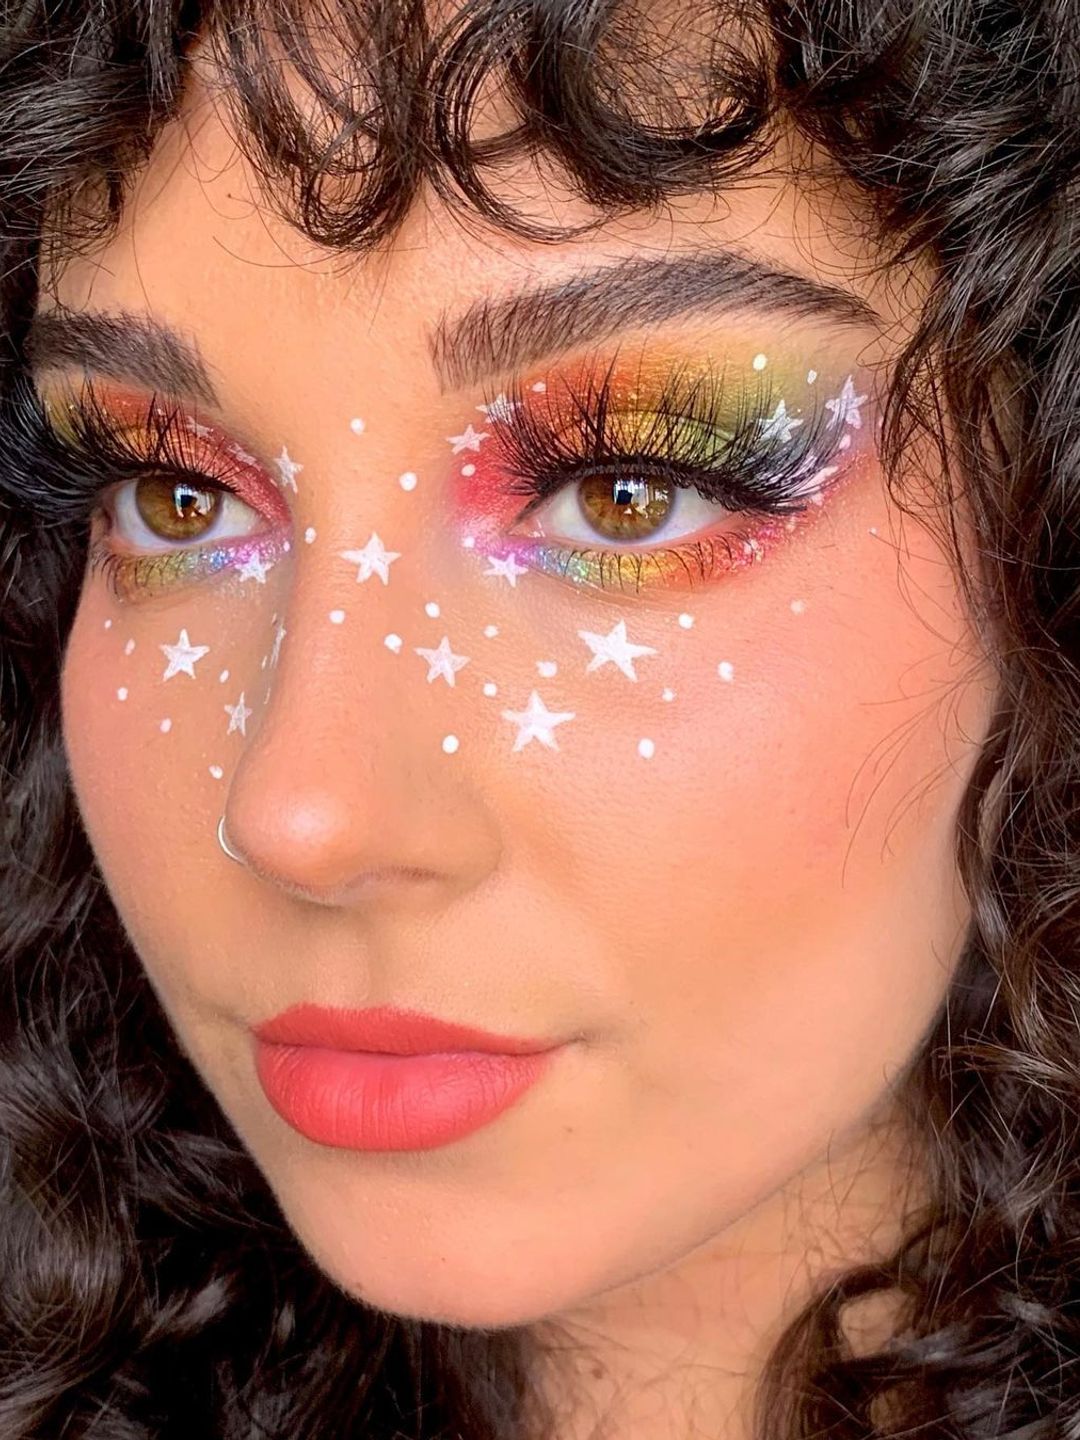 Rainbow eye makeup with white star accents 